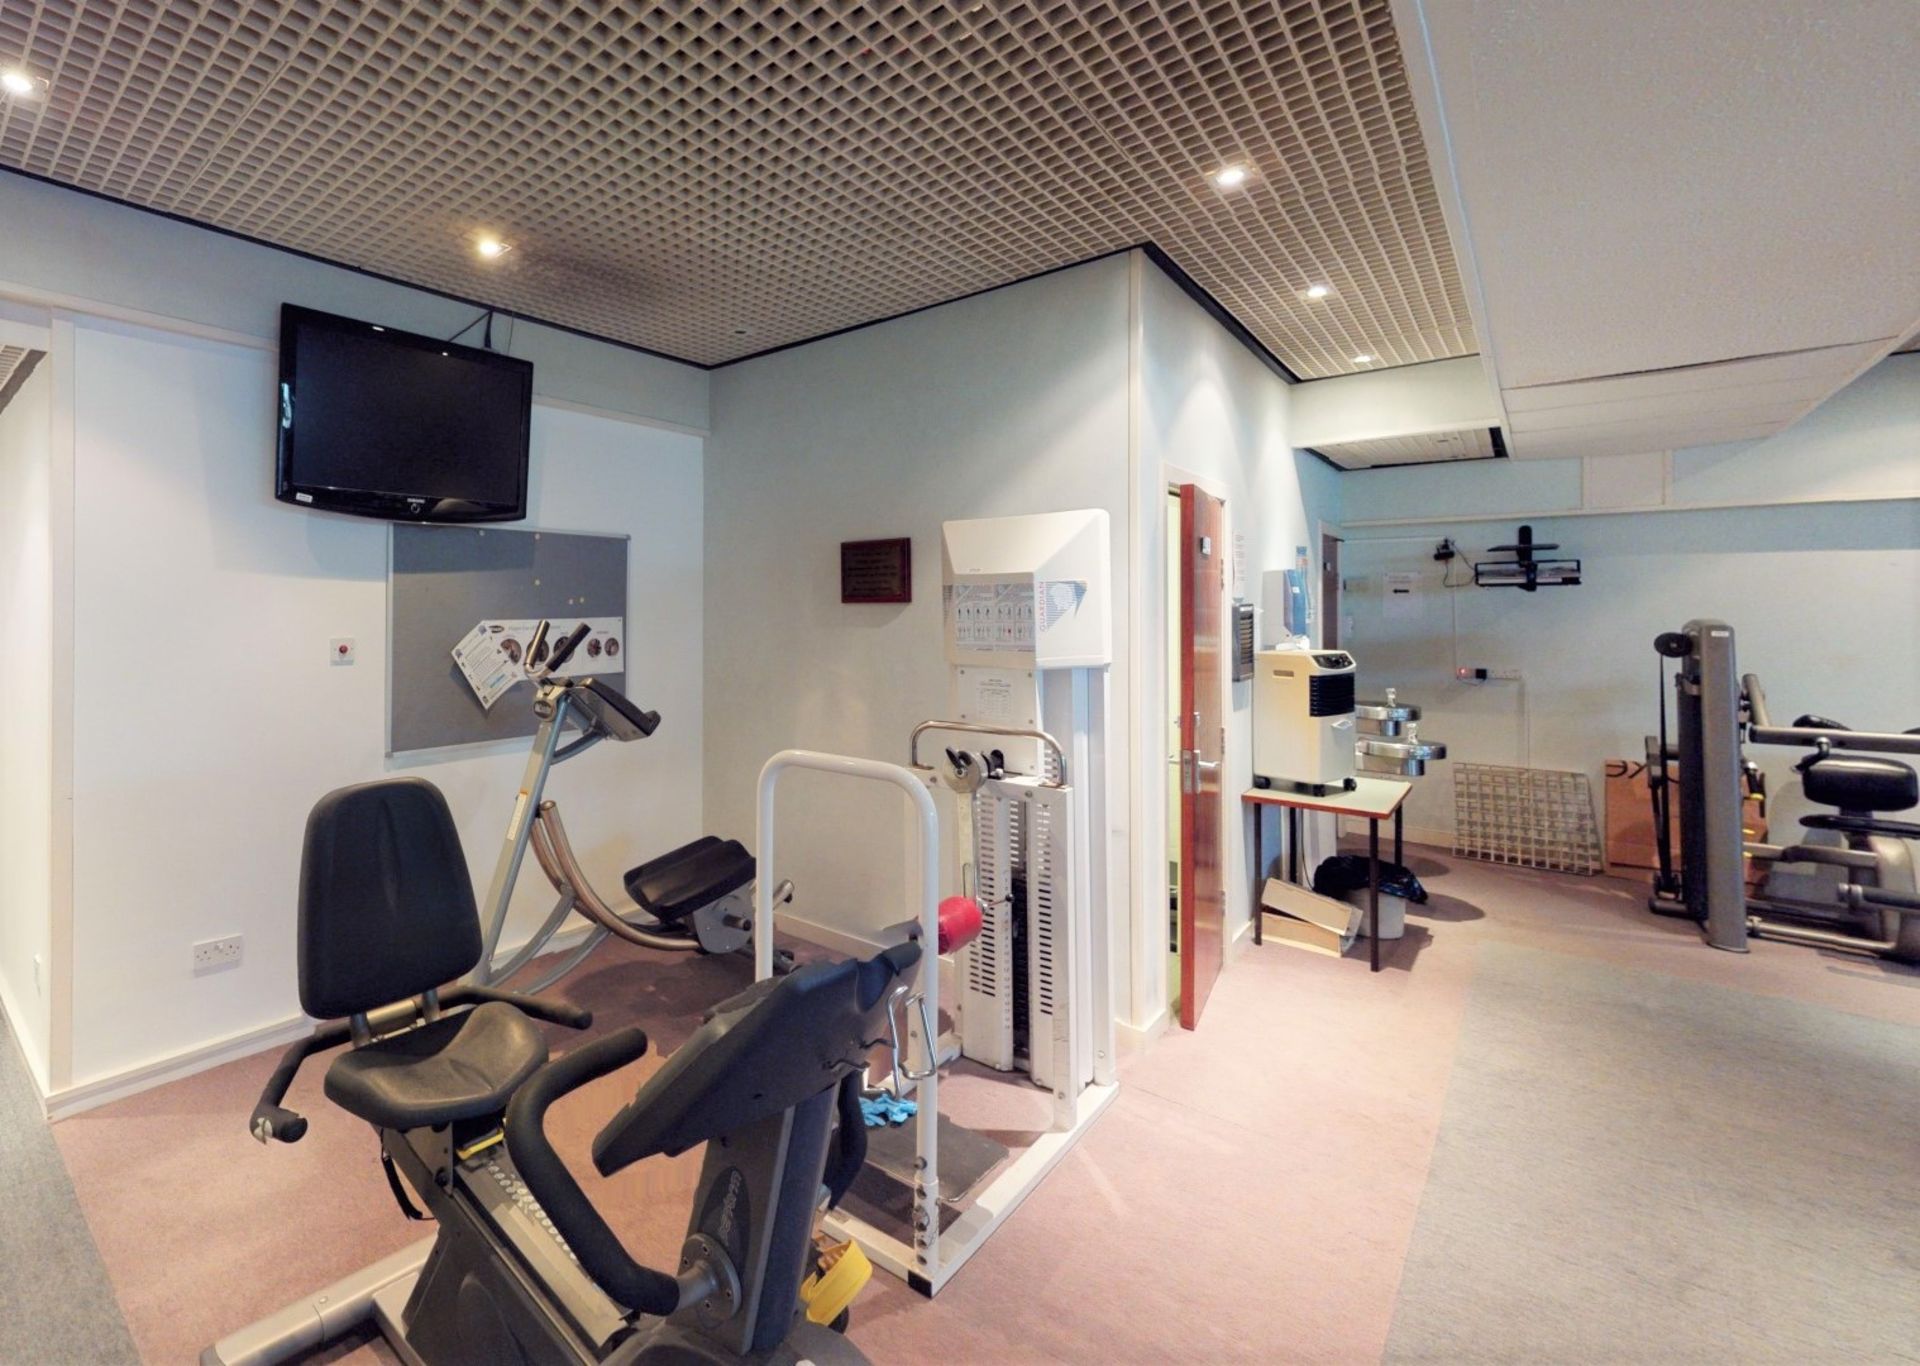 Take a Virtual SITE TOUR of The Professional Gym Equipment - Location: Glasgow G67 - Image 5 of 5